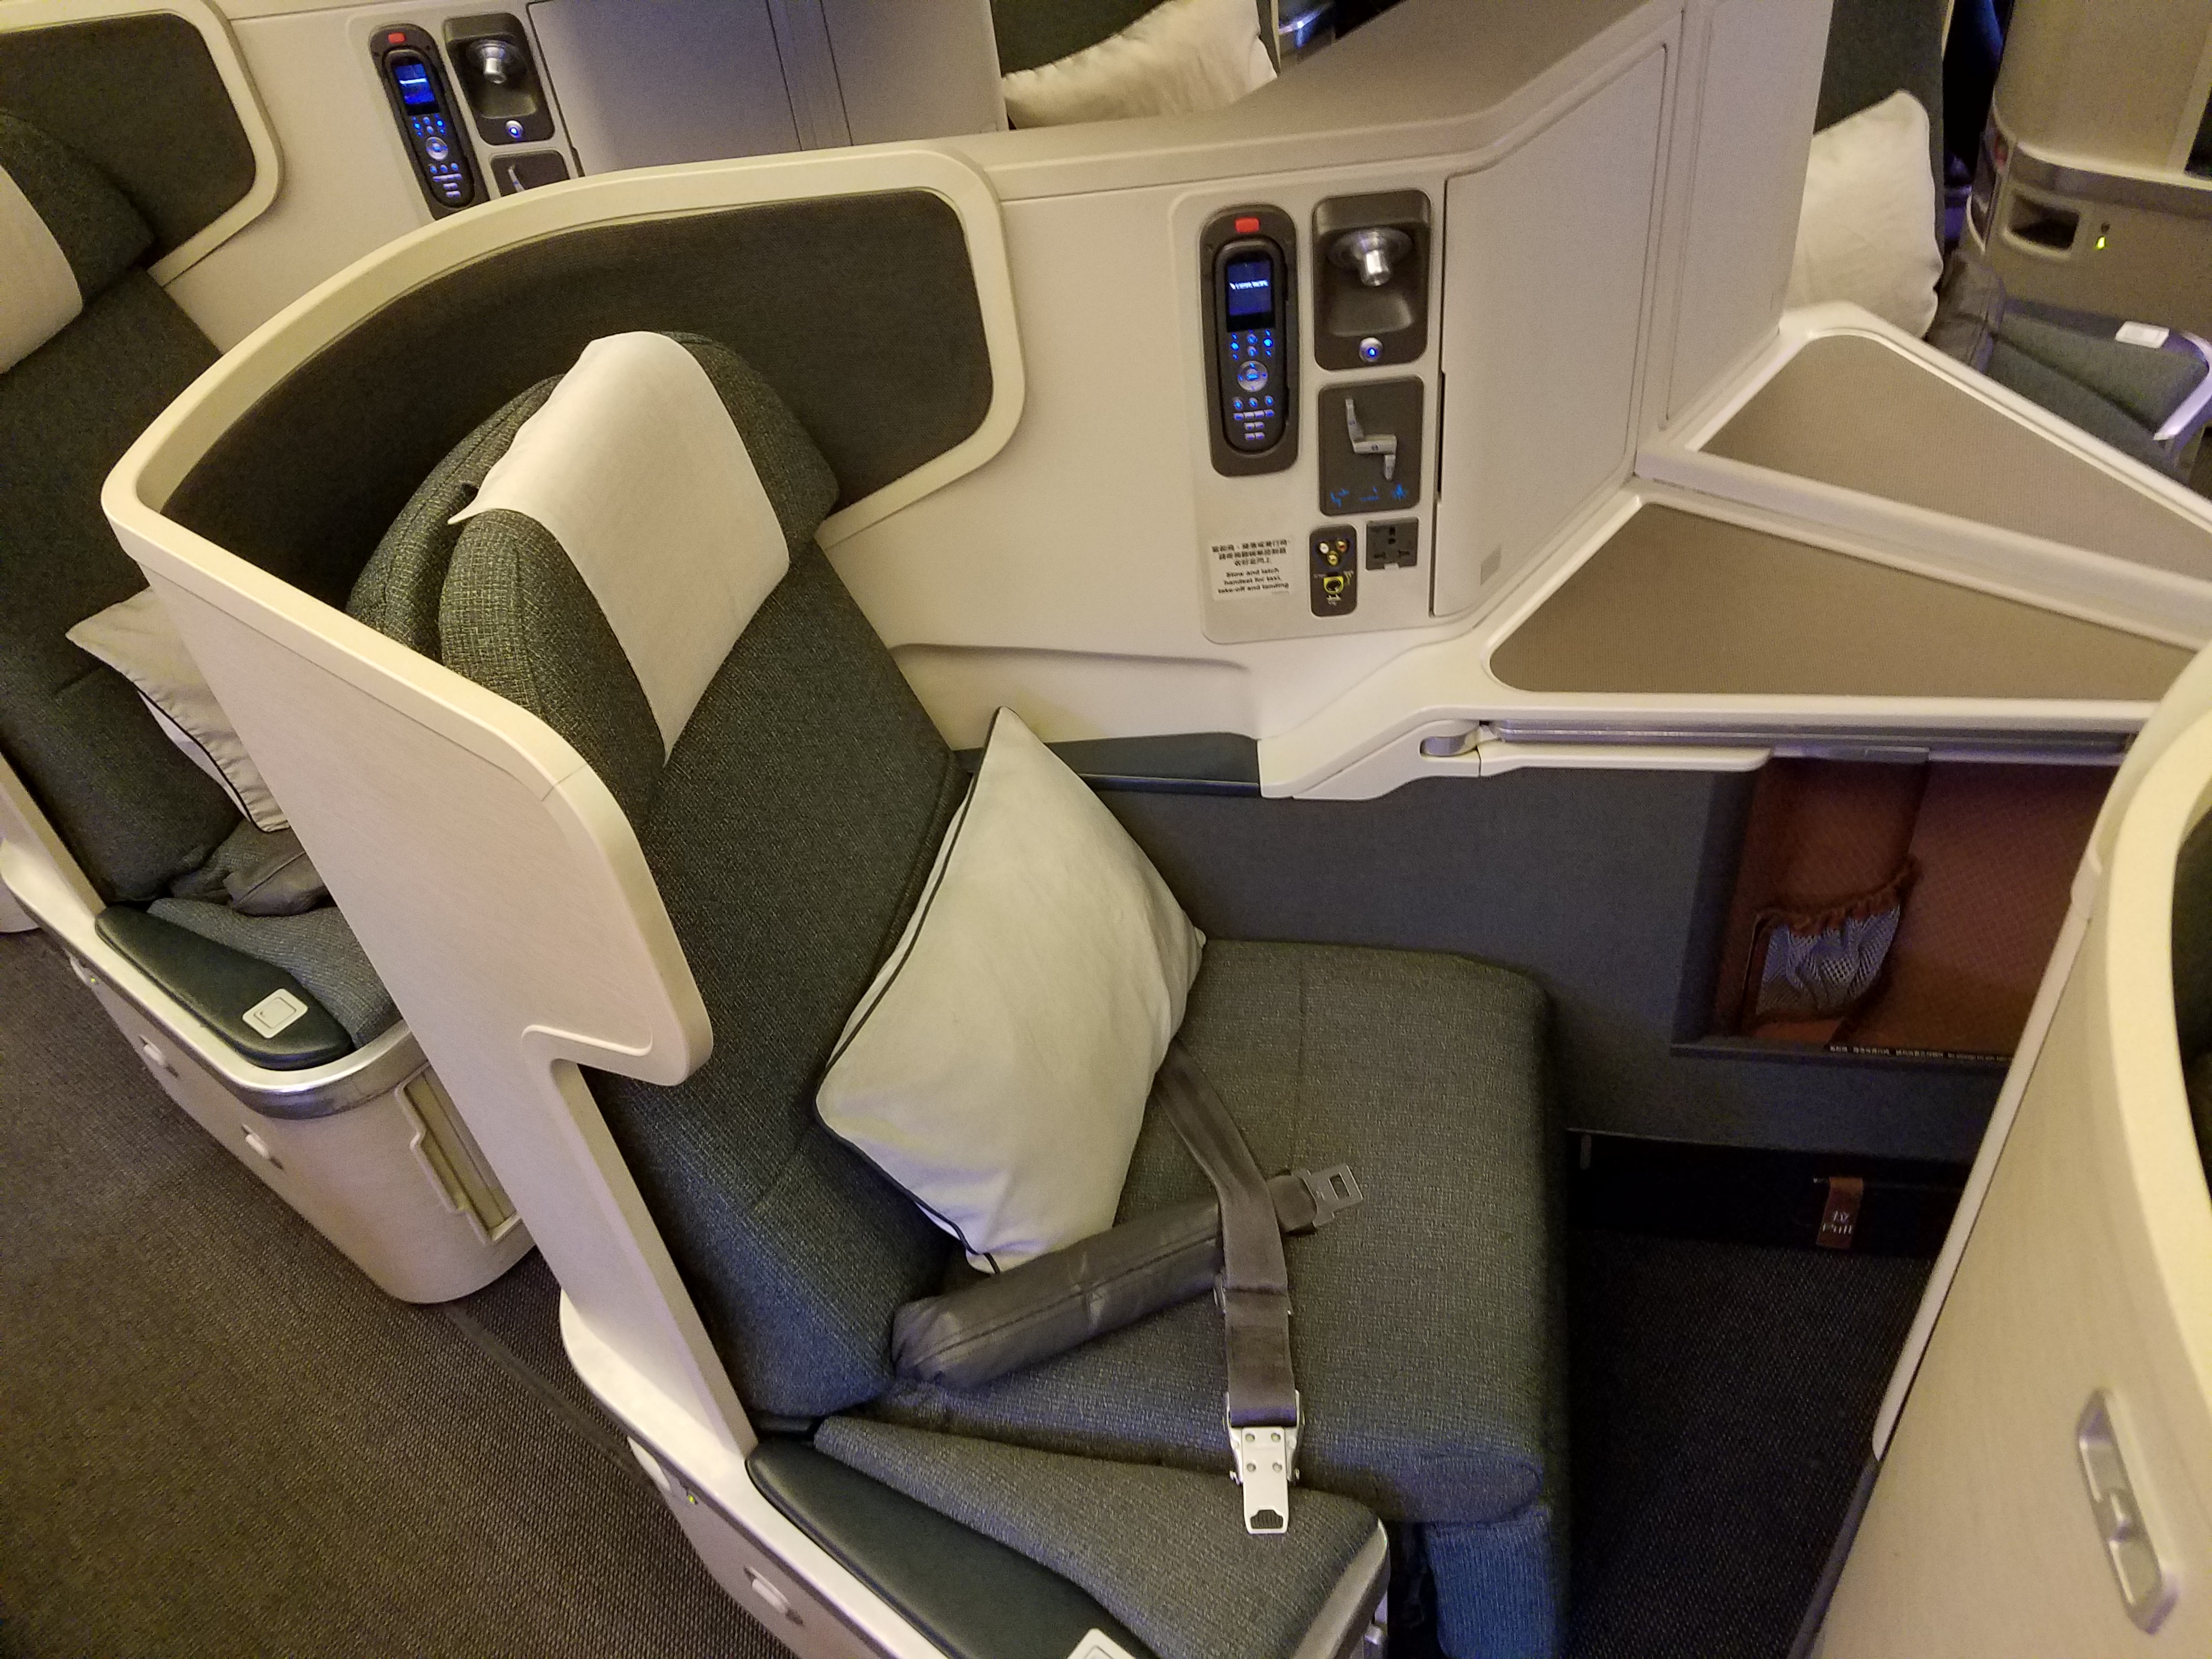 Wide Open Cathay Pacific Business Class Award Space For 4 Passengers From Several U.S. Cities